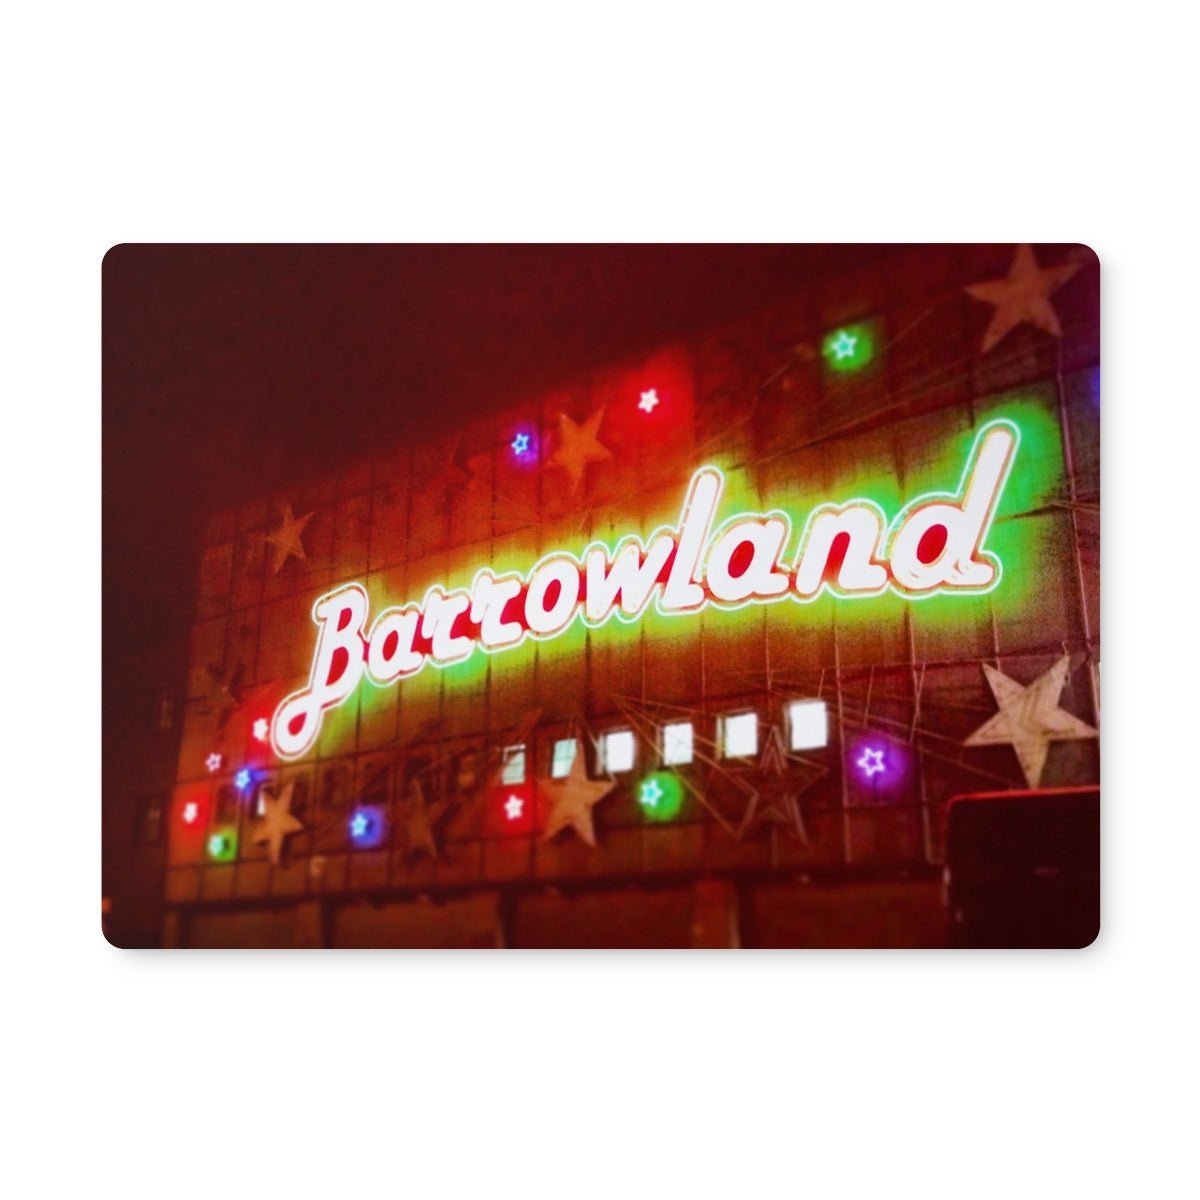 A Neon Glasgow Barrowlands Art Gifts Placemat-Placemats-Edinburgh & Glasgow Art Gallery-Single Placemat-Paintings, Prints, Homeware, Art Gifts From Scotland By Scottish Artist Kevin Hunter